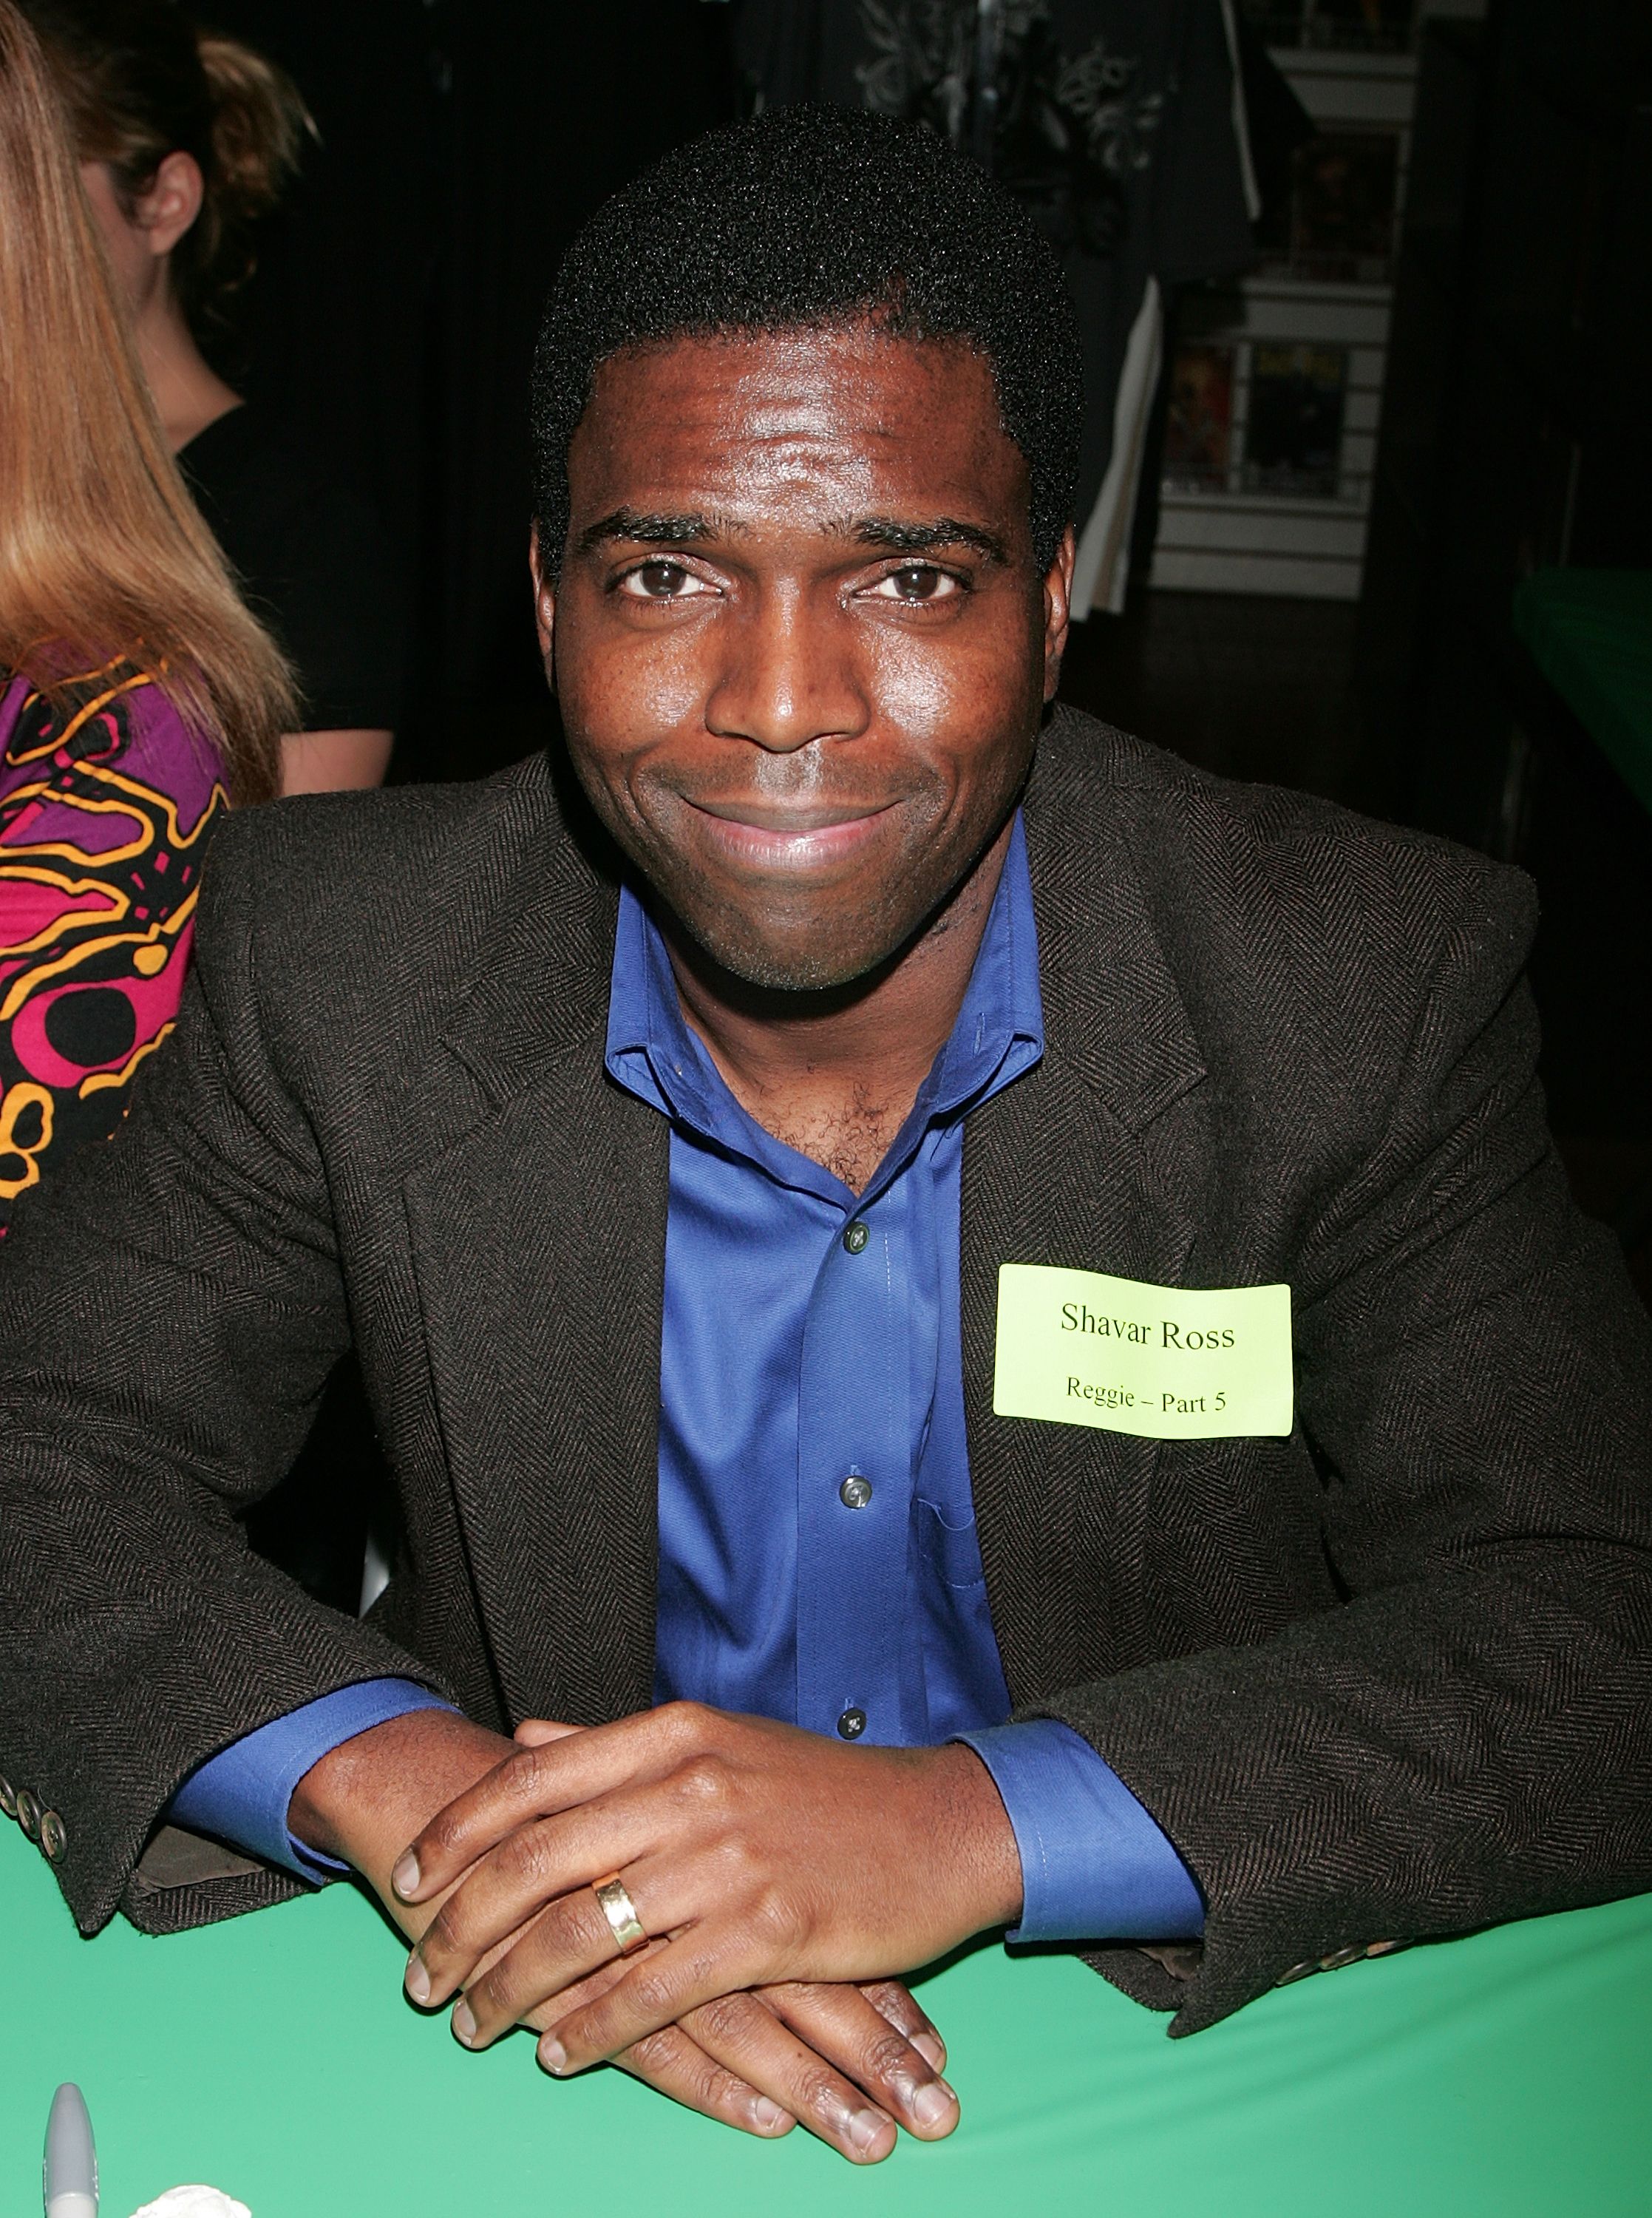 Shavar Ross at the Anchor Bay Entertainment's Jason Voorhees reunion at Emerald Knights comics and games store on February 3, 2009 in Burbank, California. | Source: Getty Images